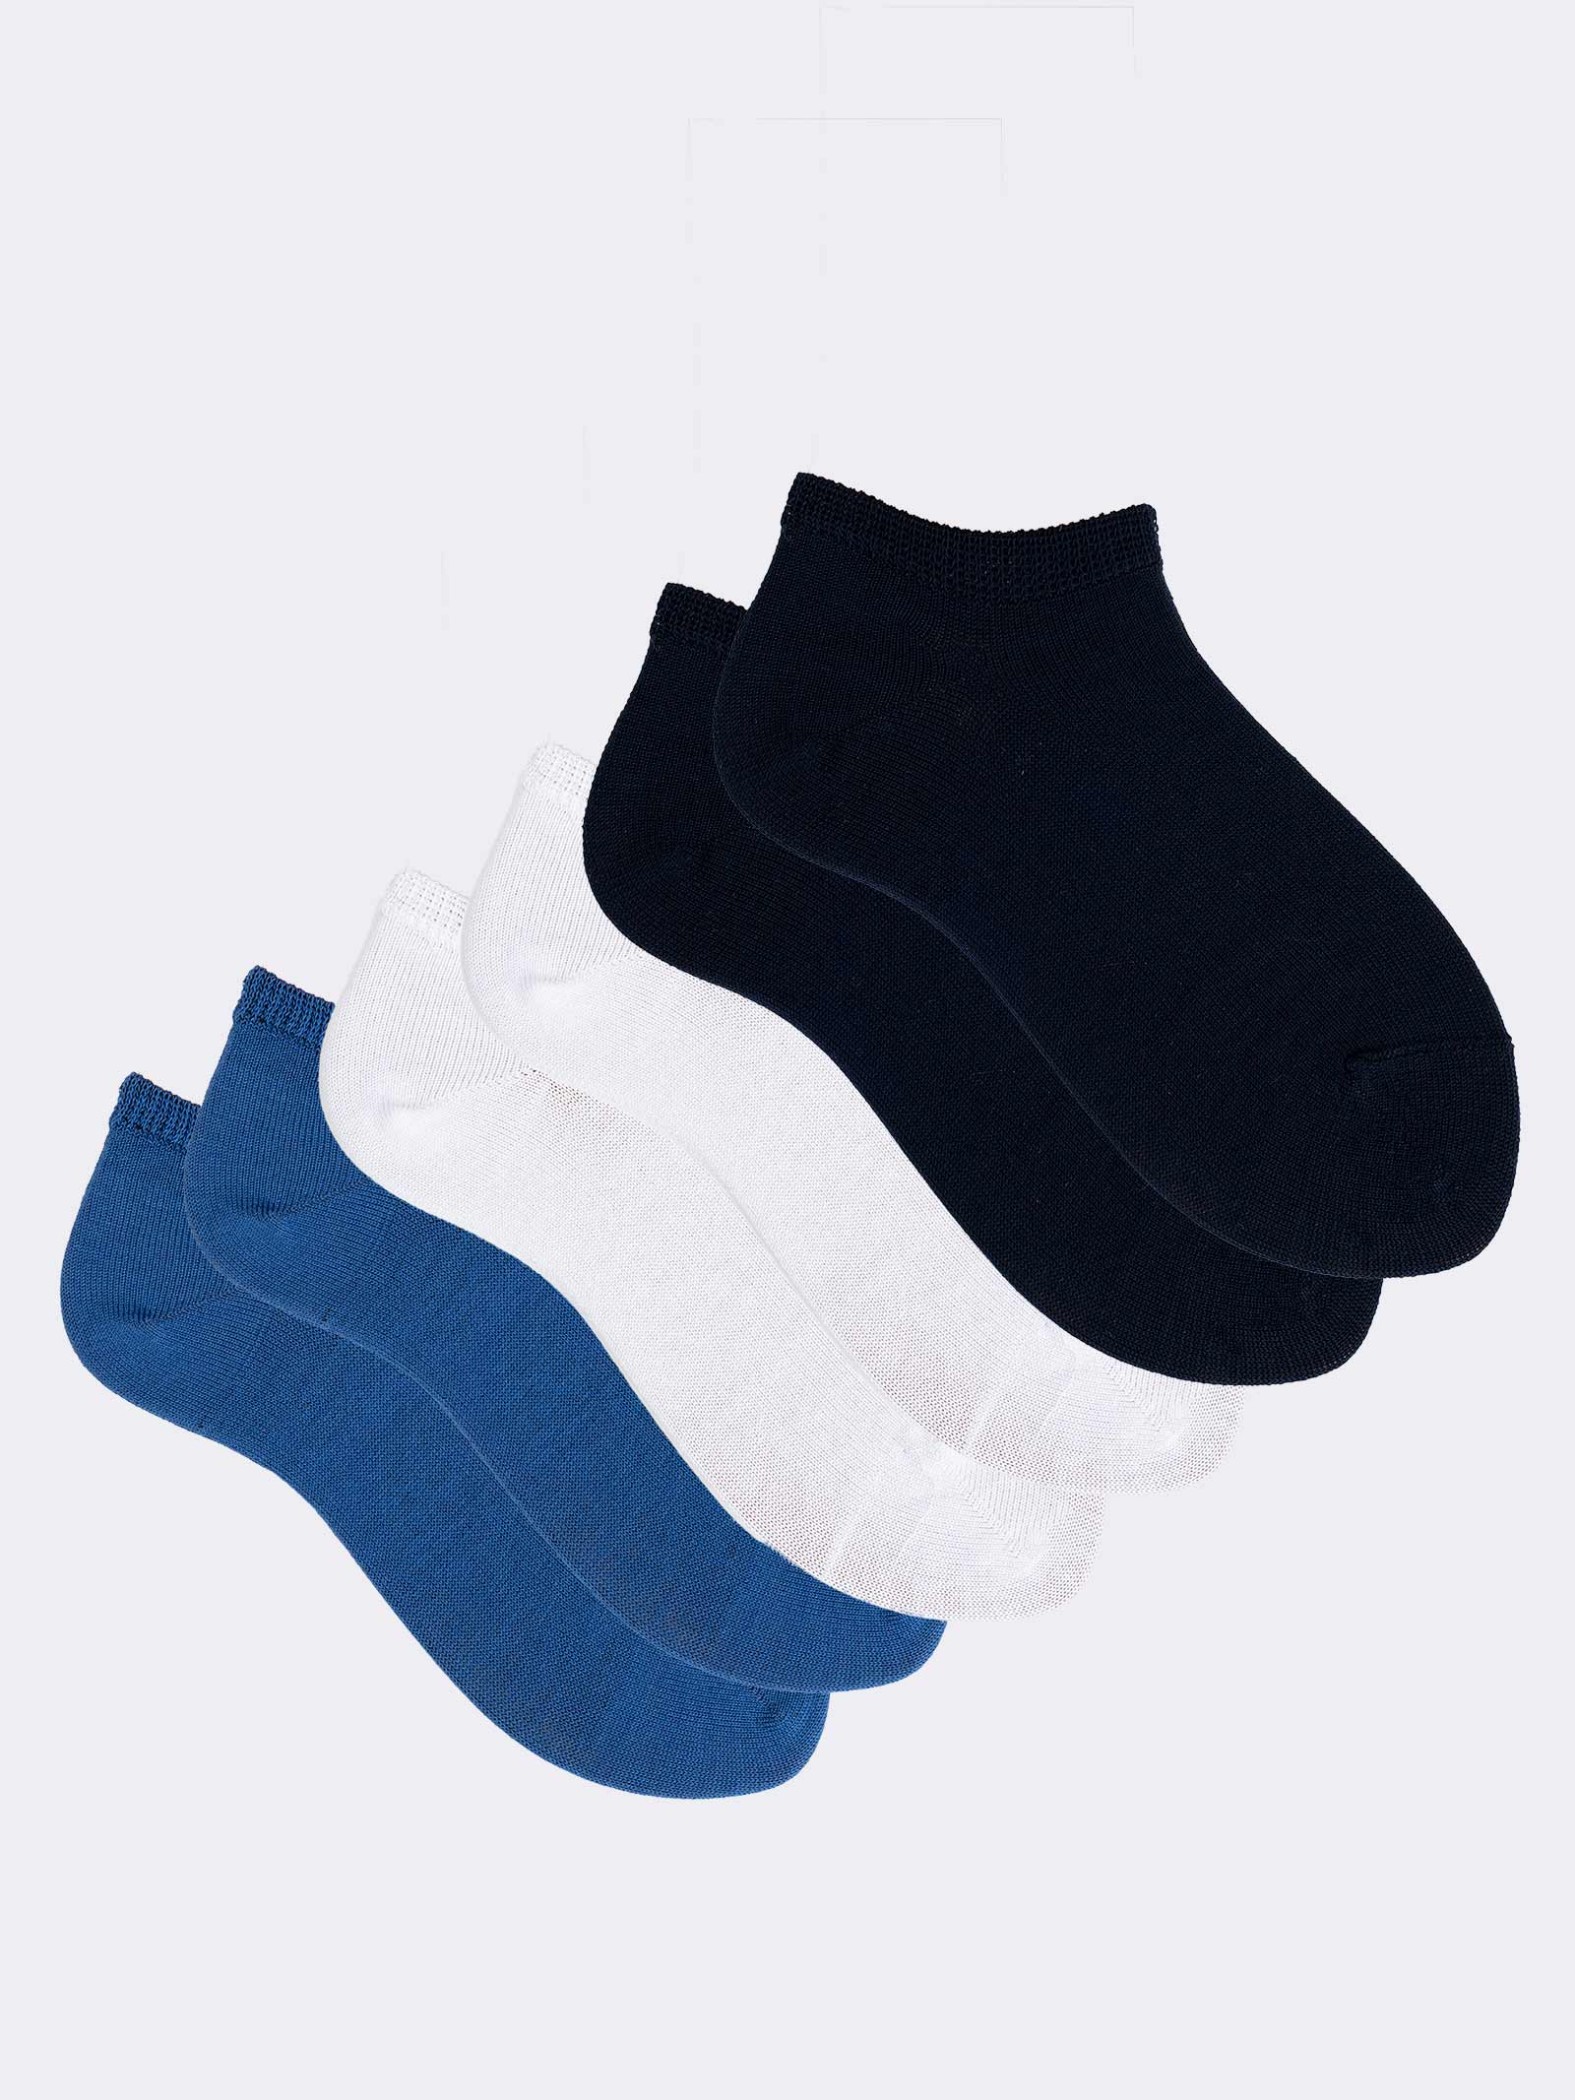 3 Pairs Children's Calf Socks in Cool Cotton Solid Colour